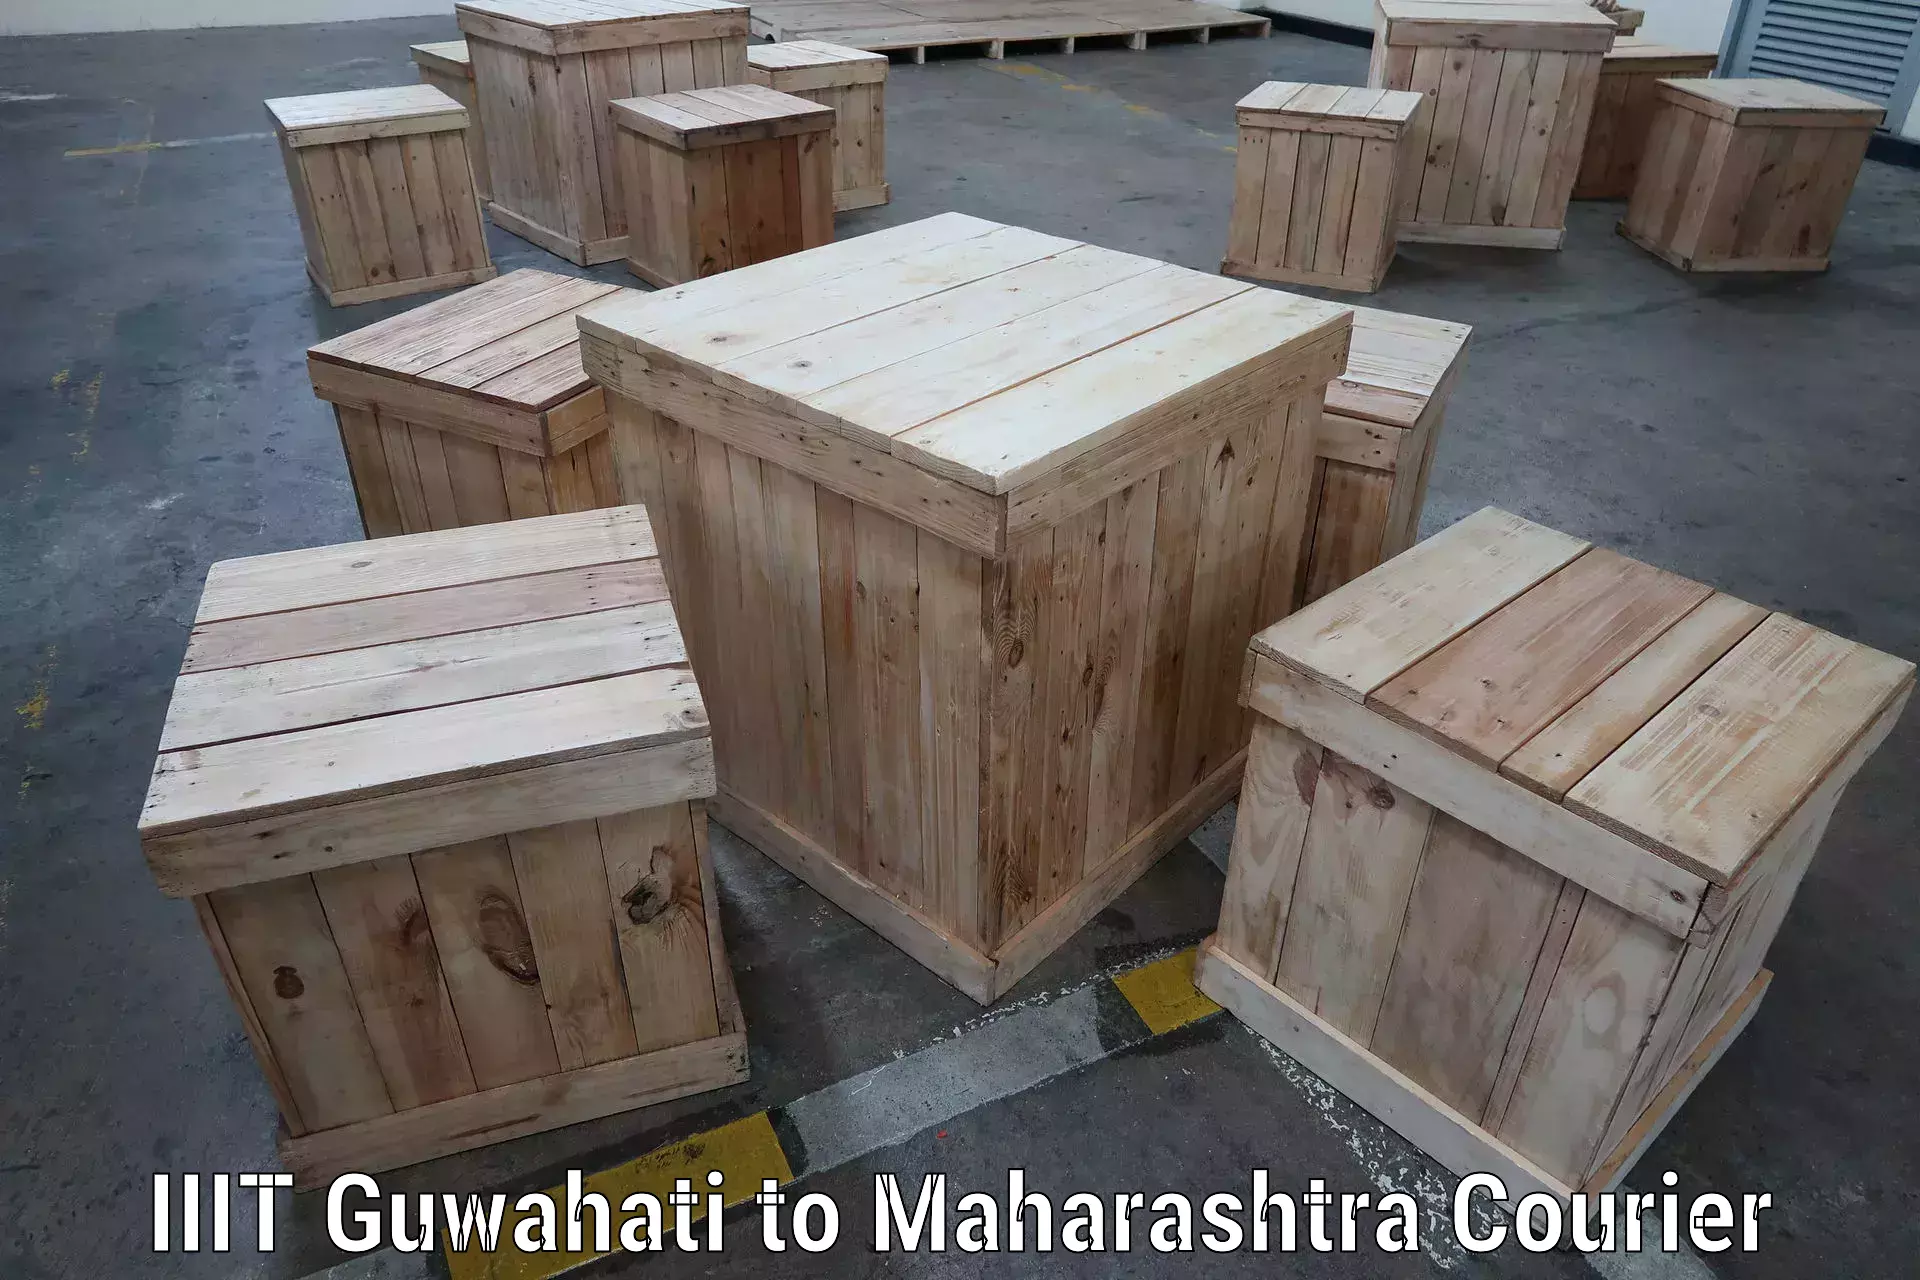 Round-the-clock parcel delivery IIIT Guwahati to Maharashtra